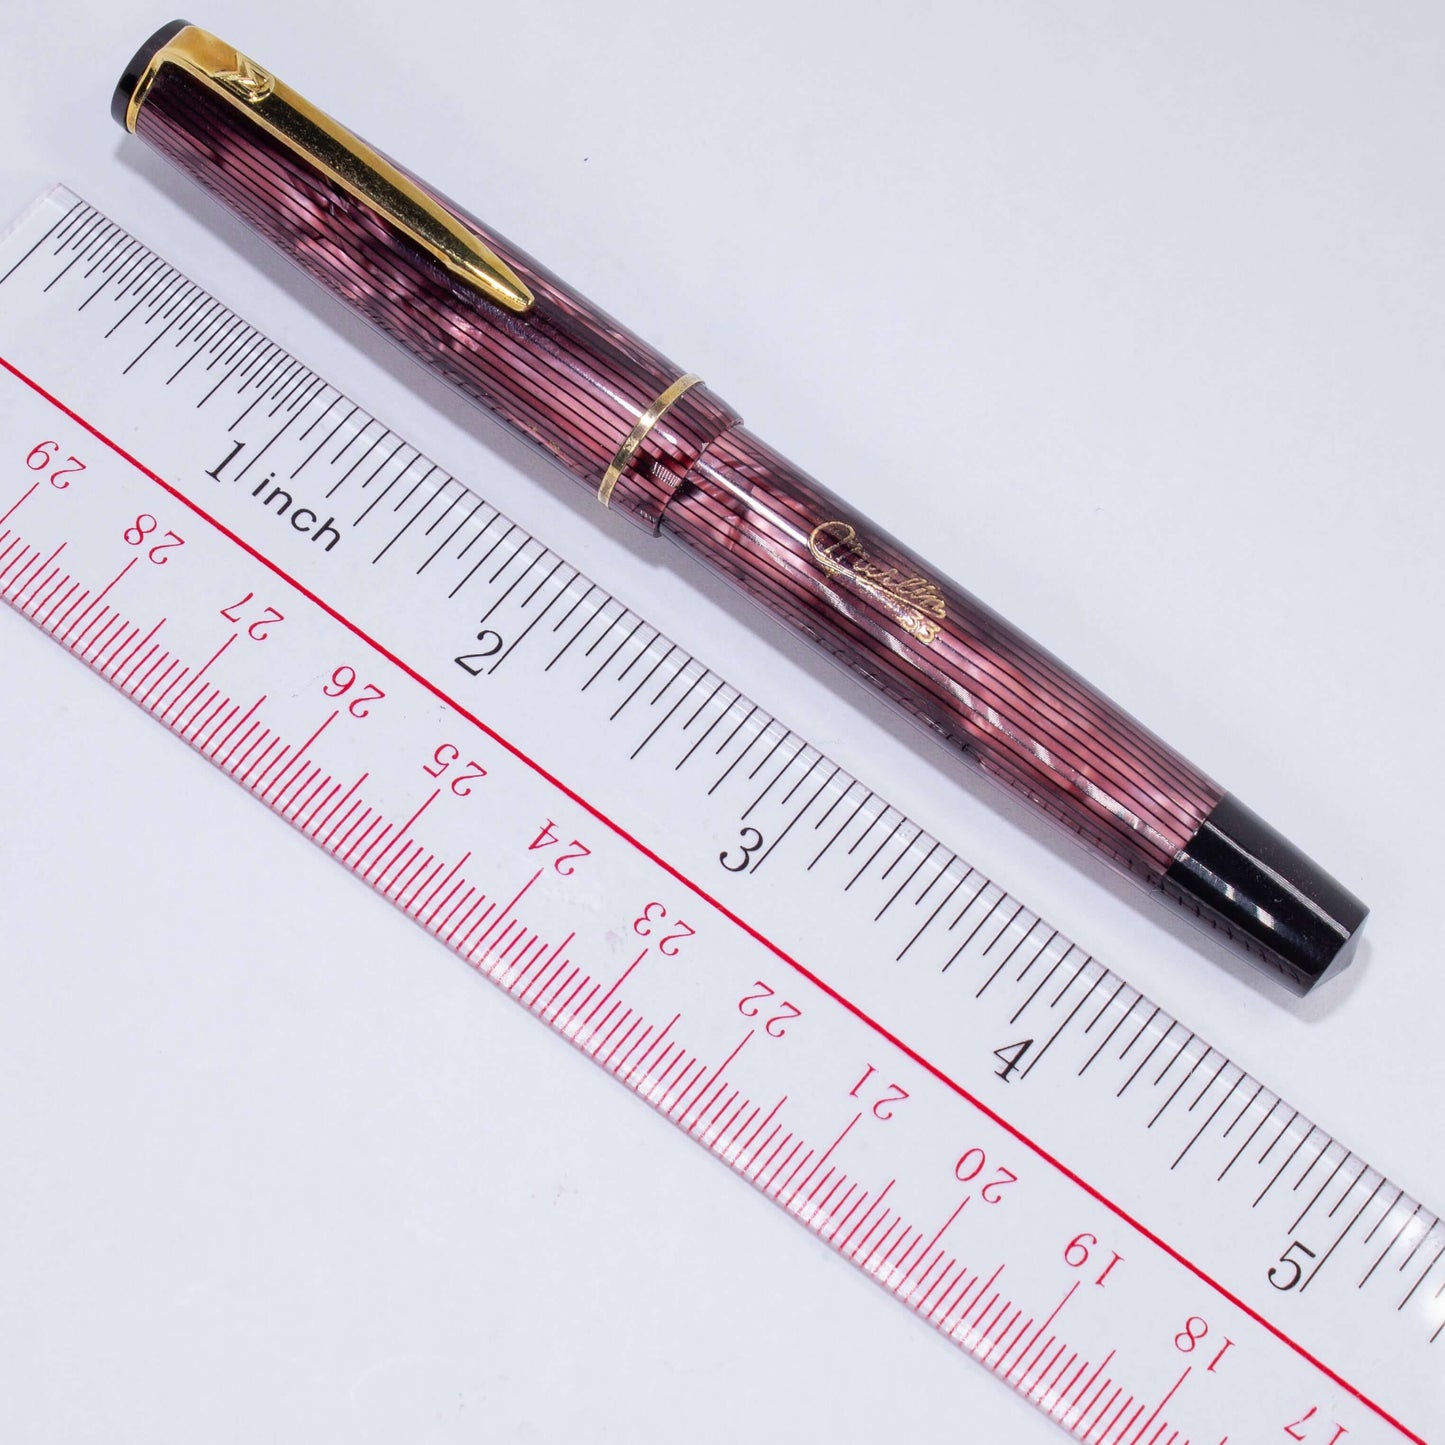 Merlin 33 Fountain Pen, Pink Stripe, Gold Trim 14K Merlin Nib, Flexible, Button Filler with New Sac Installed Type: Vintage Button Filler Fountain Pen Product Name: Merlin Manufacture Year: 1950s, made in Europe Length: 4 3/4 Filling System: Button Filler